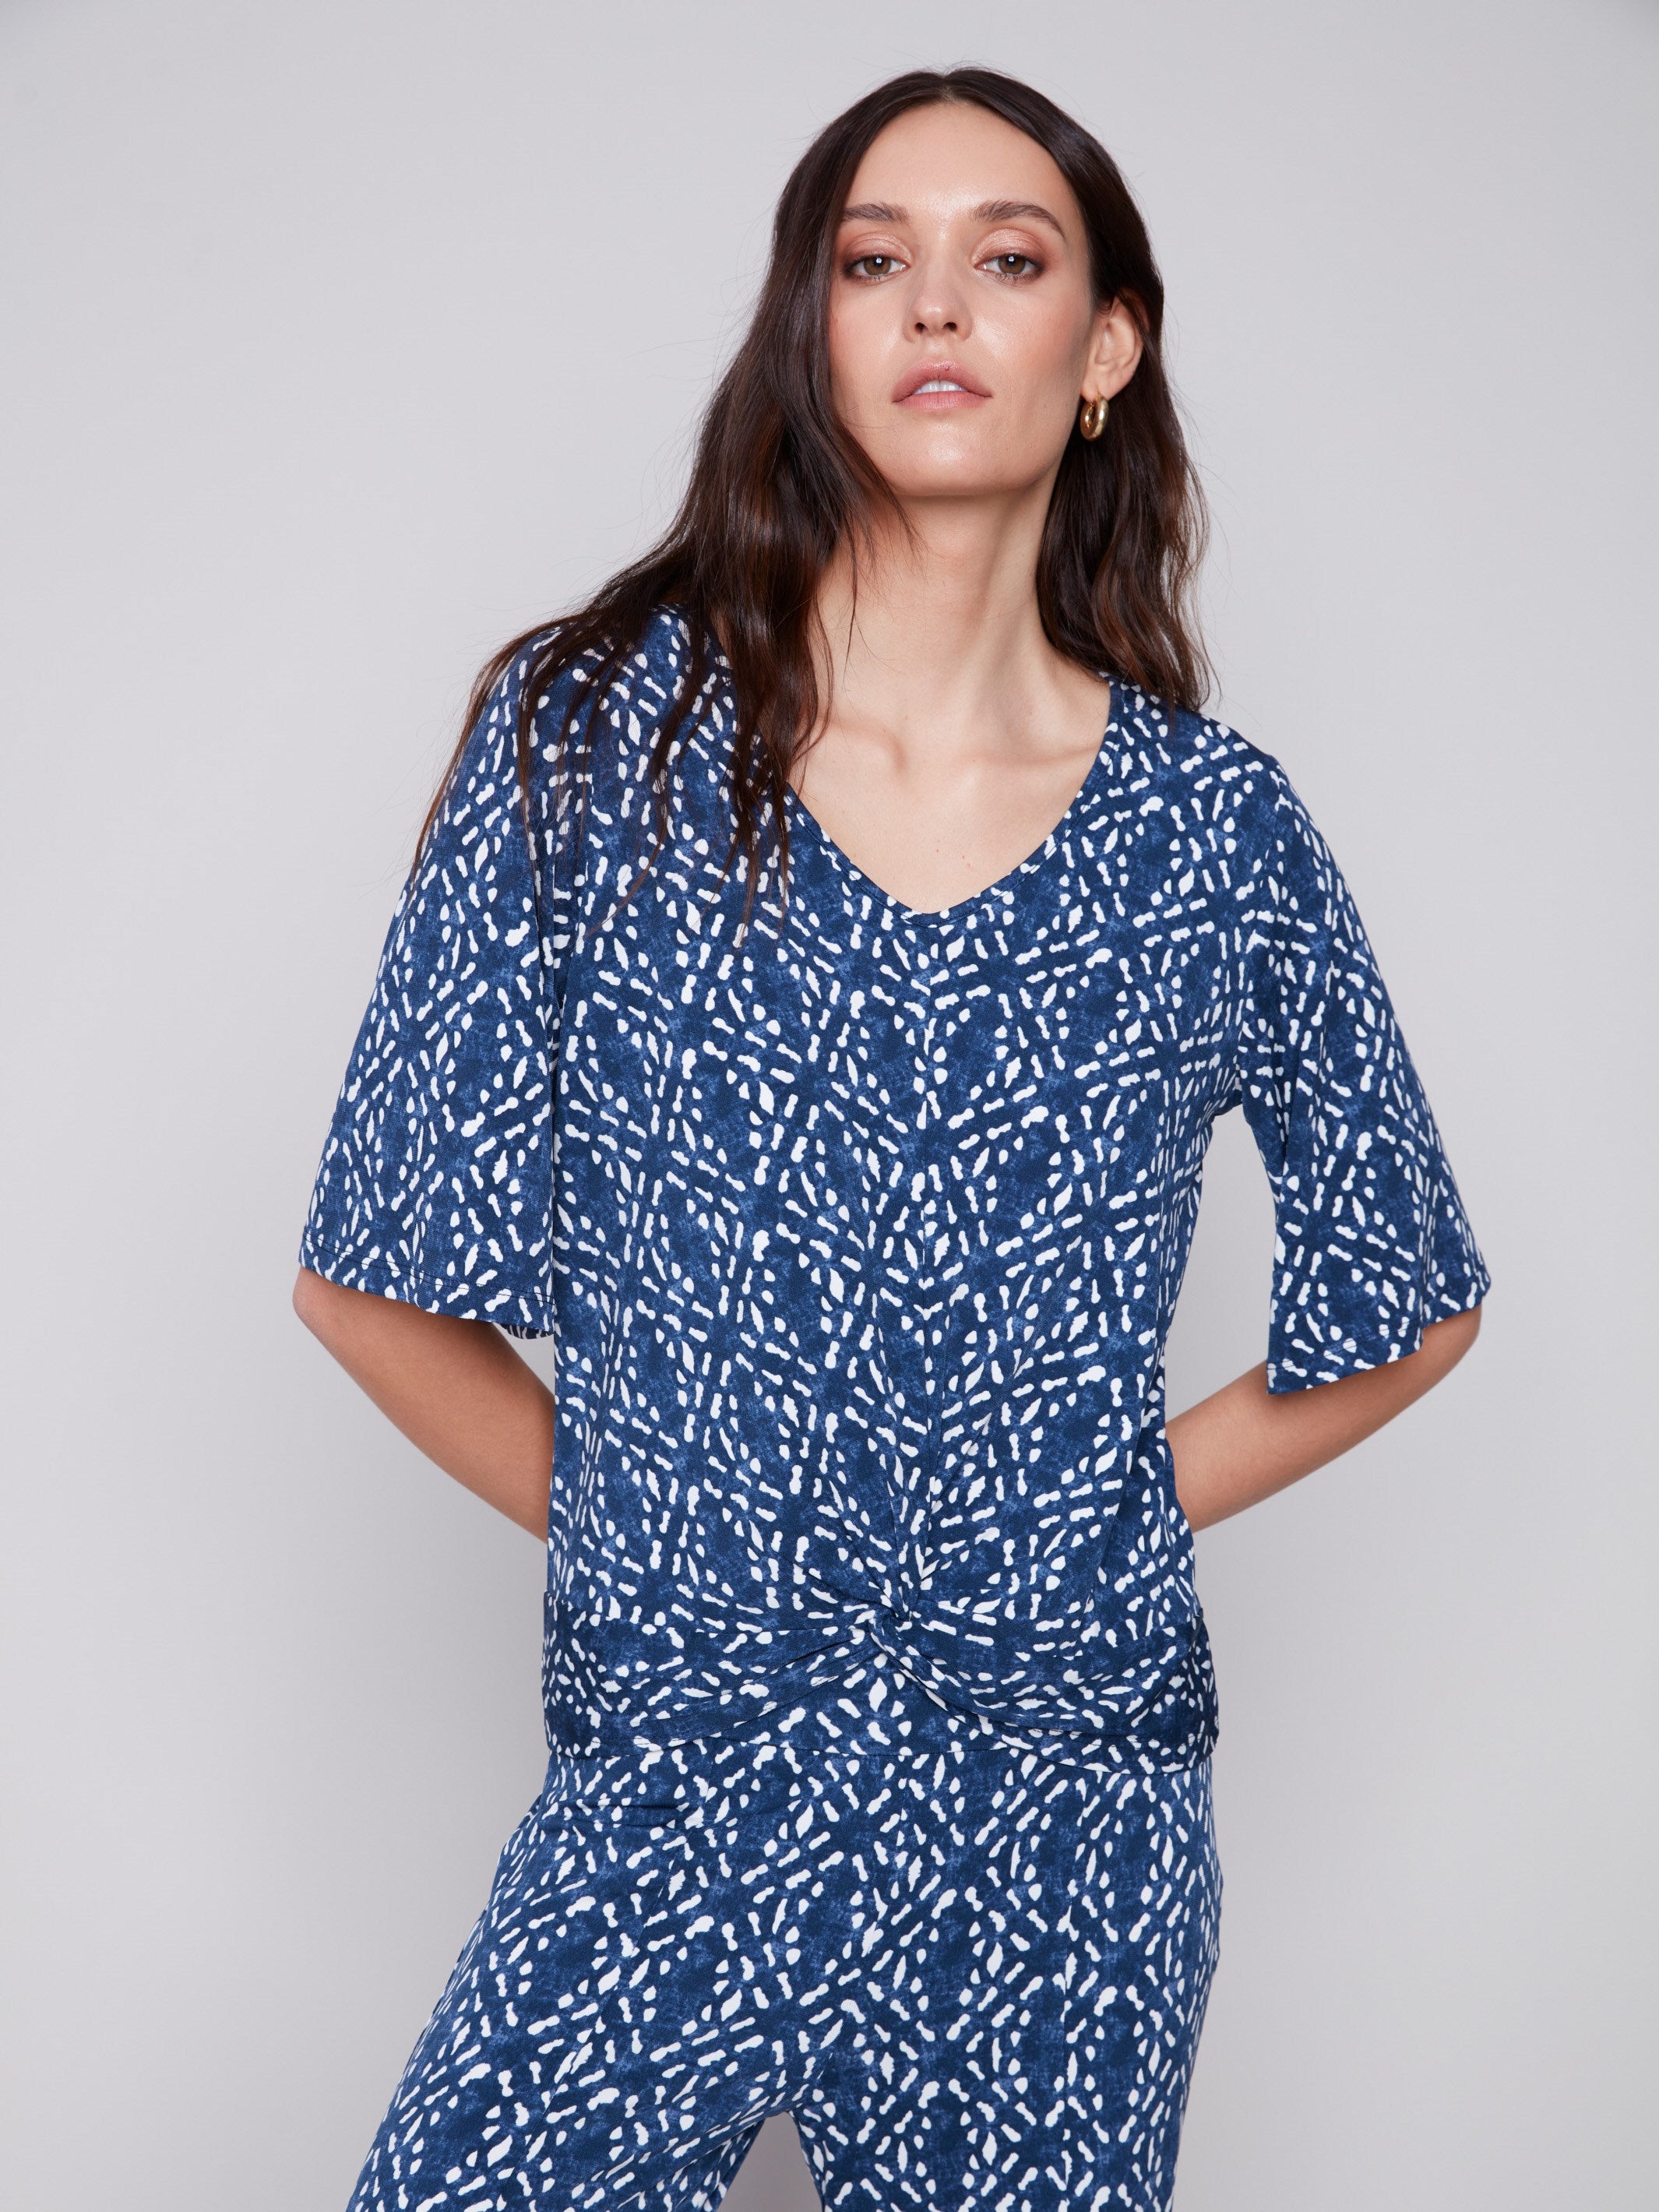 Short-Sleeved Printed Top with Front Knot - Indigo - Charlie B Collection Canada - Image 1